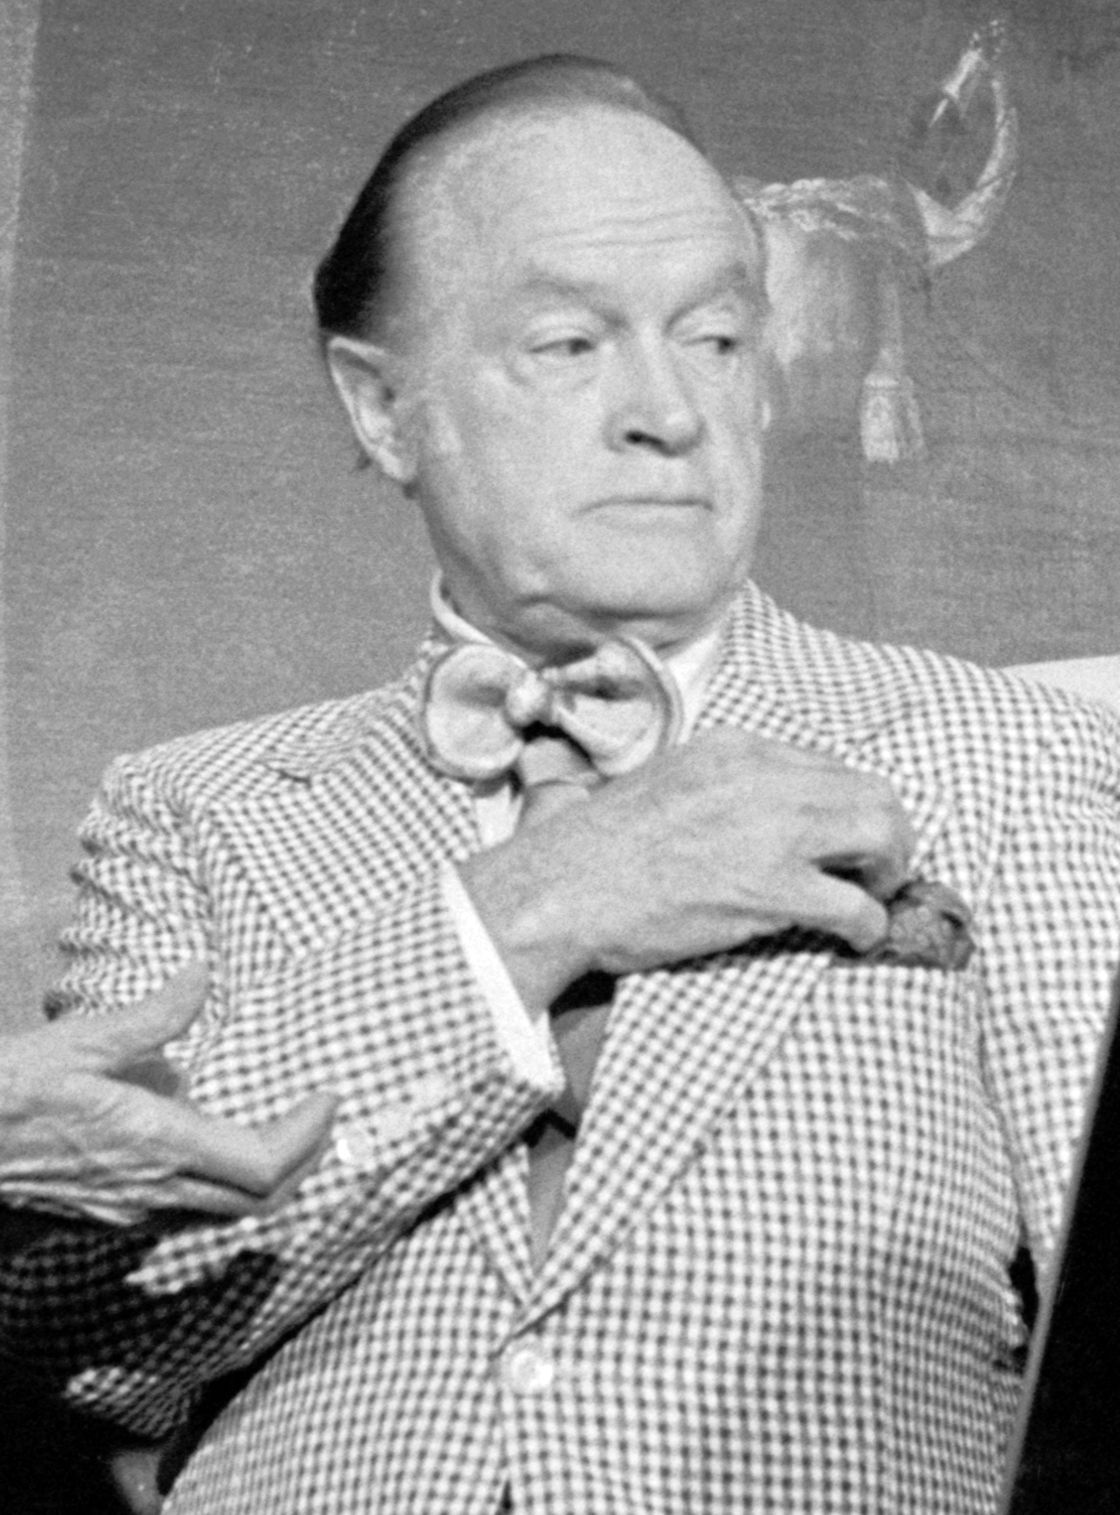 Pictures of Bob Hope